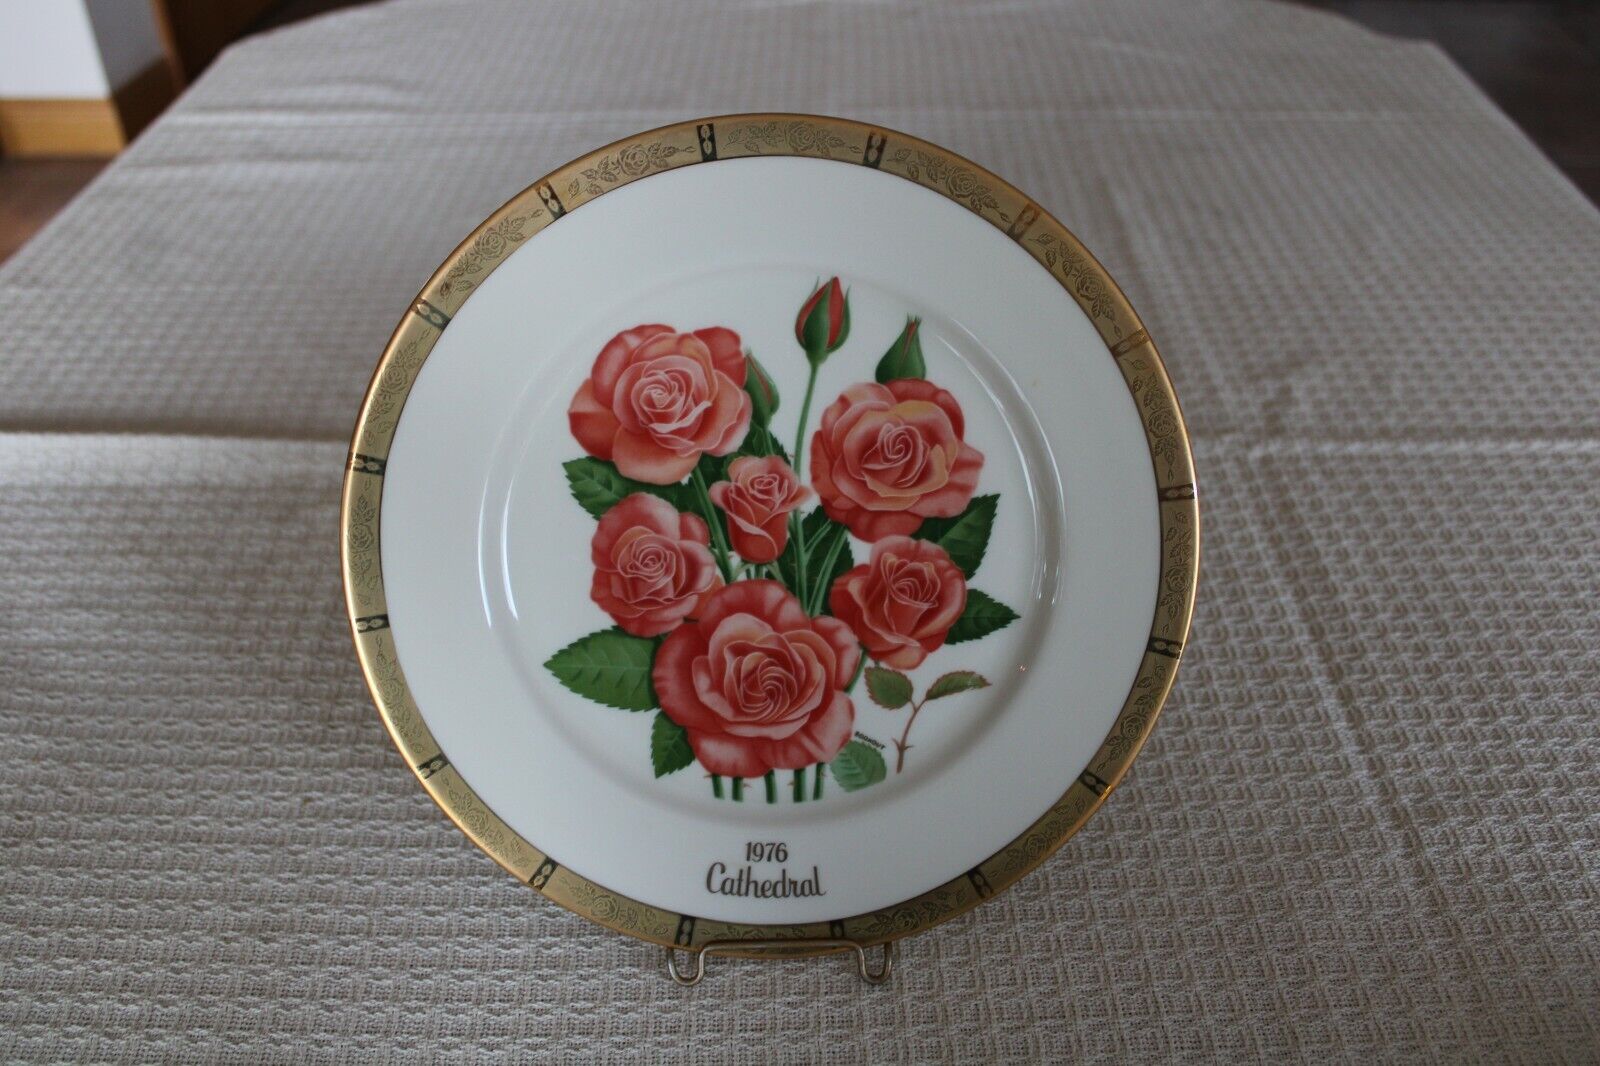 Gorham 1976 Cathedral  All-American Rose Selection Gallery Edition China Plate